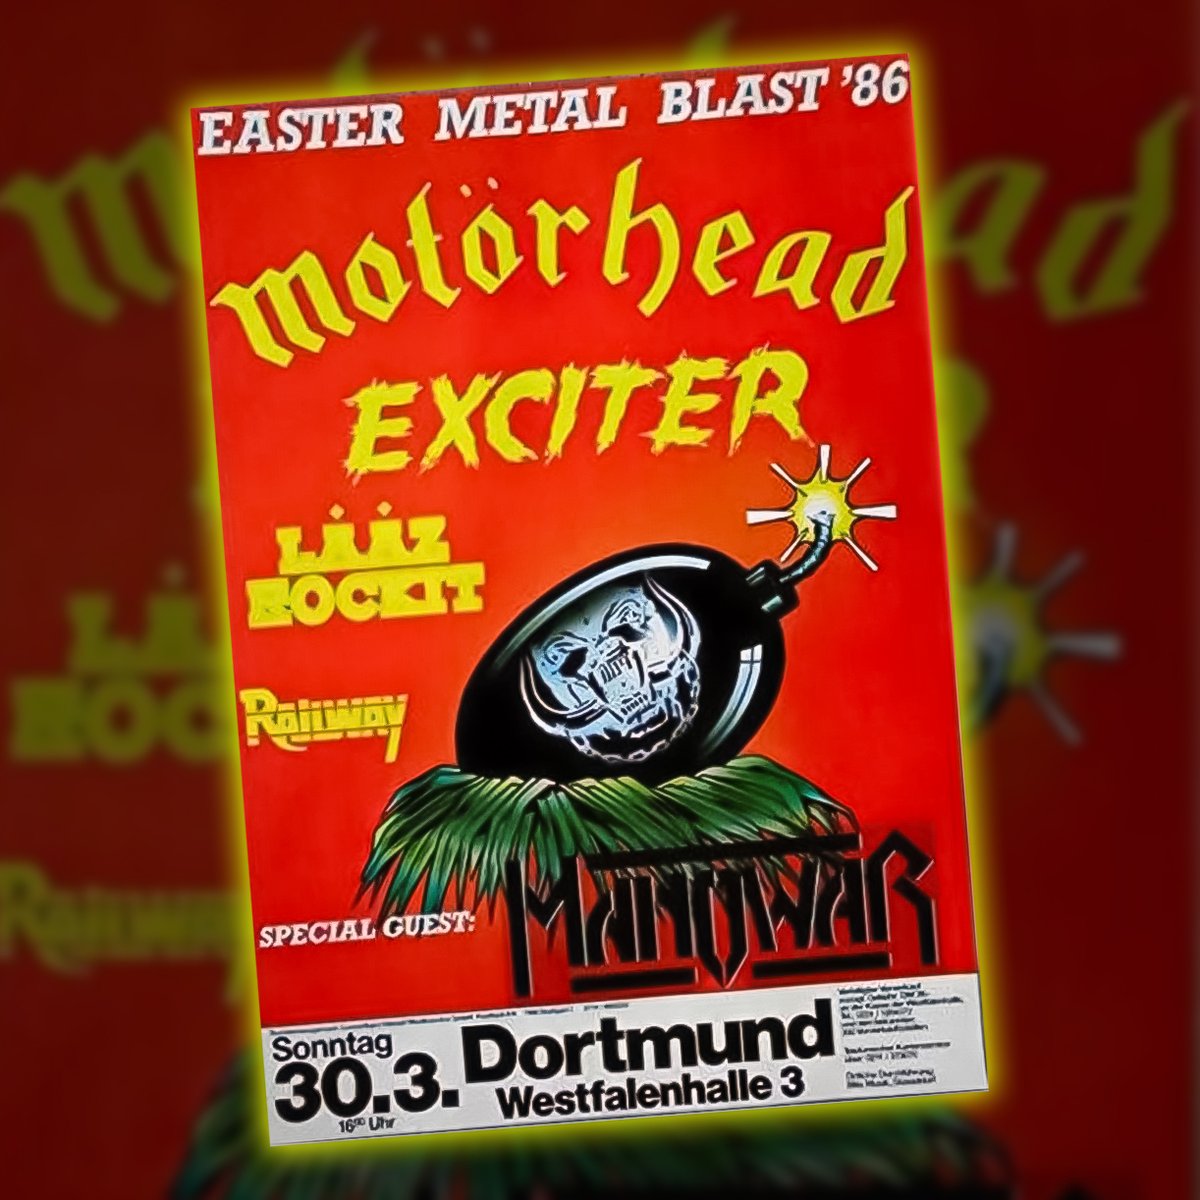 Now this was a deafening Easter gig! Who was at the Easter Metal Blast of ’86?